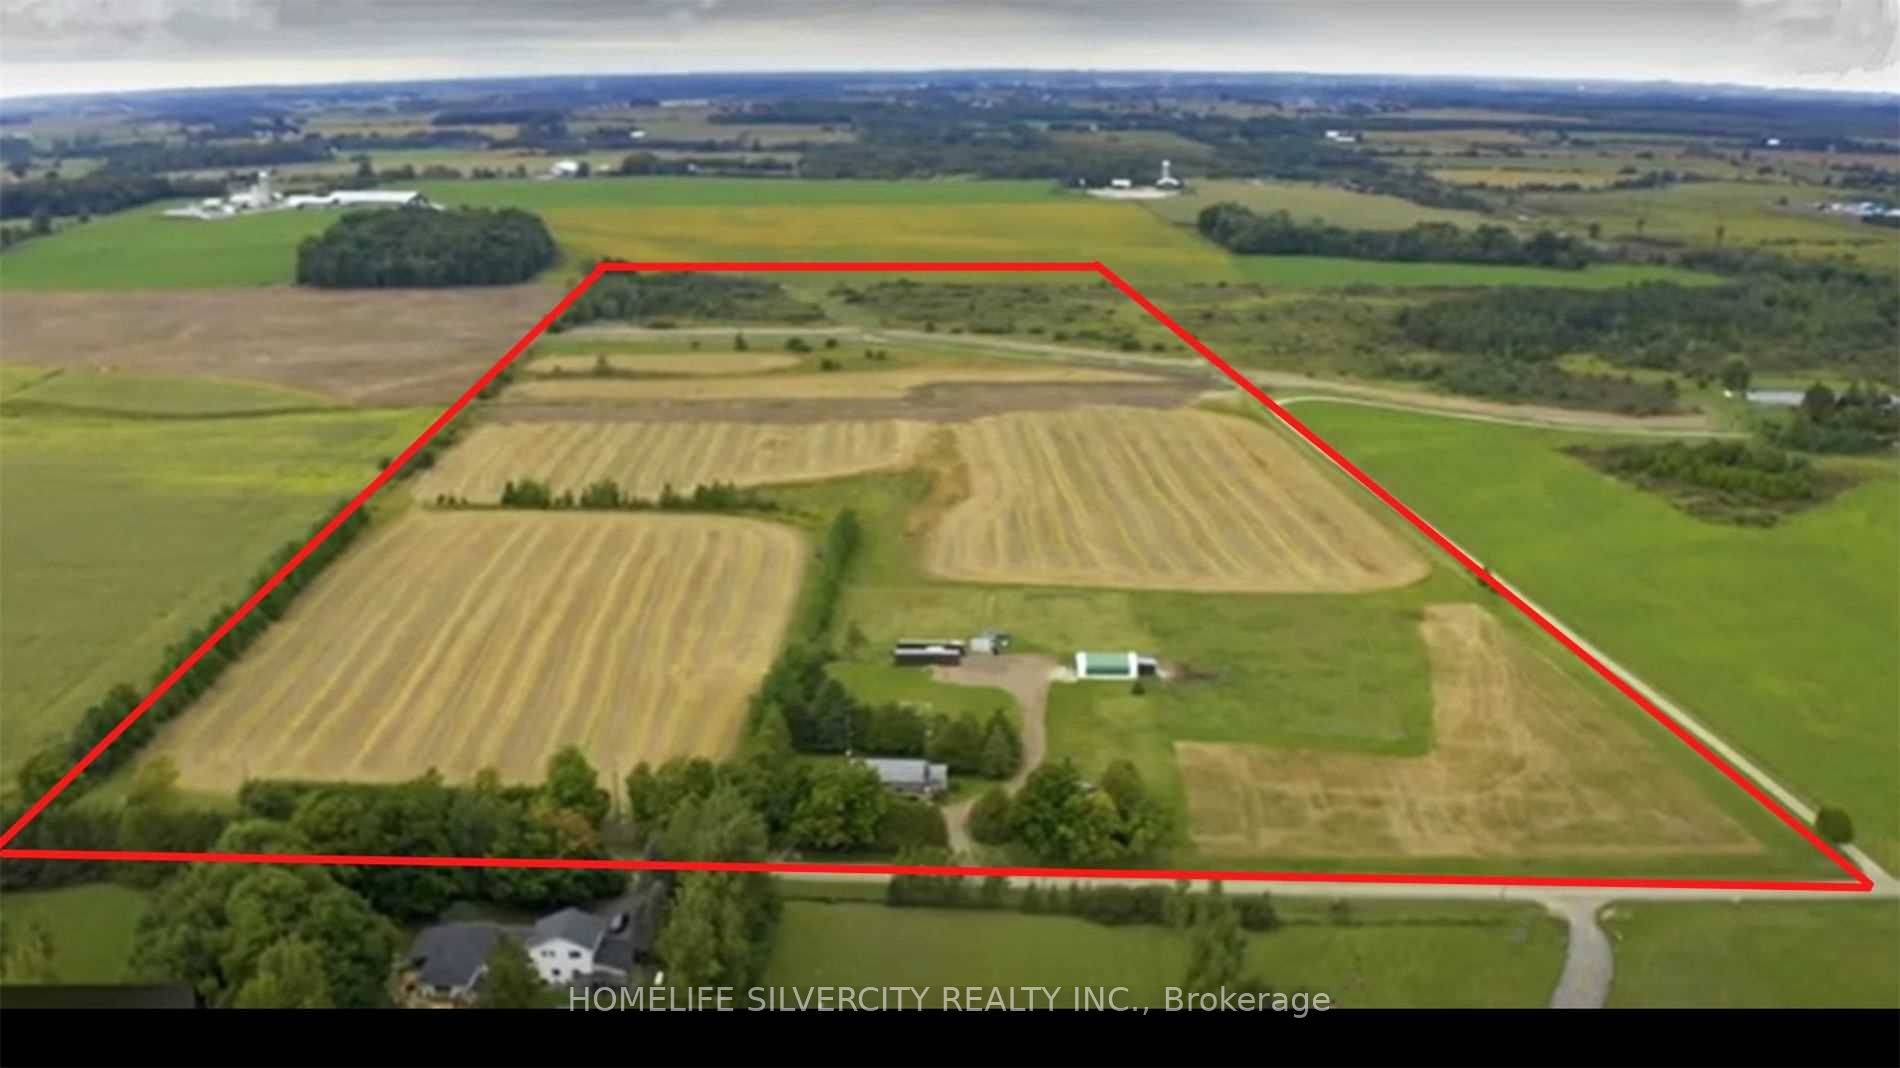 Immaculate 62. 5 Acres Farm Land With Stunning 2 2 Bedroom Bungalow W Fin Basement Sep Entrance.